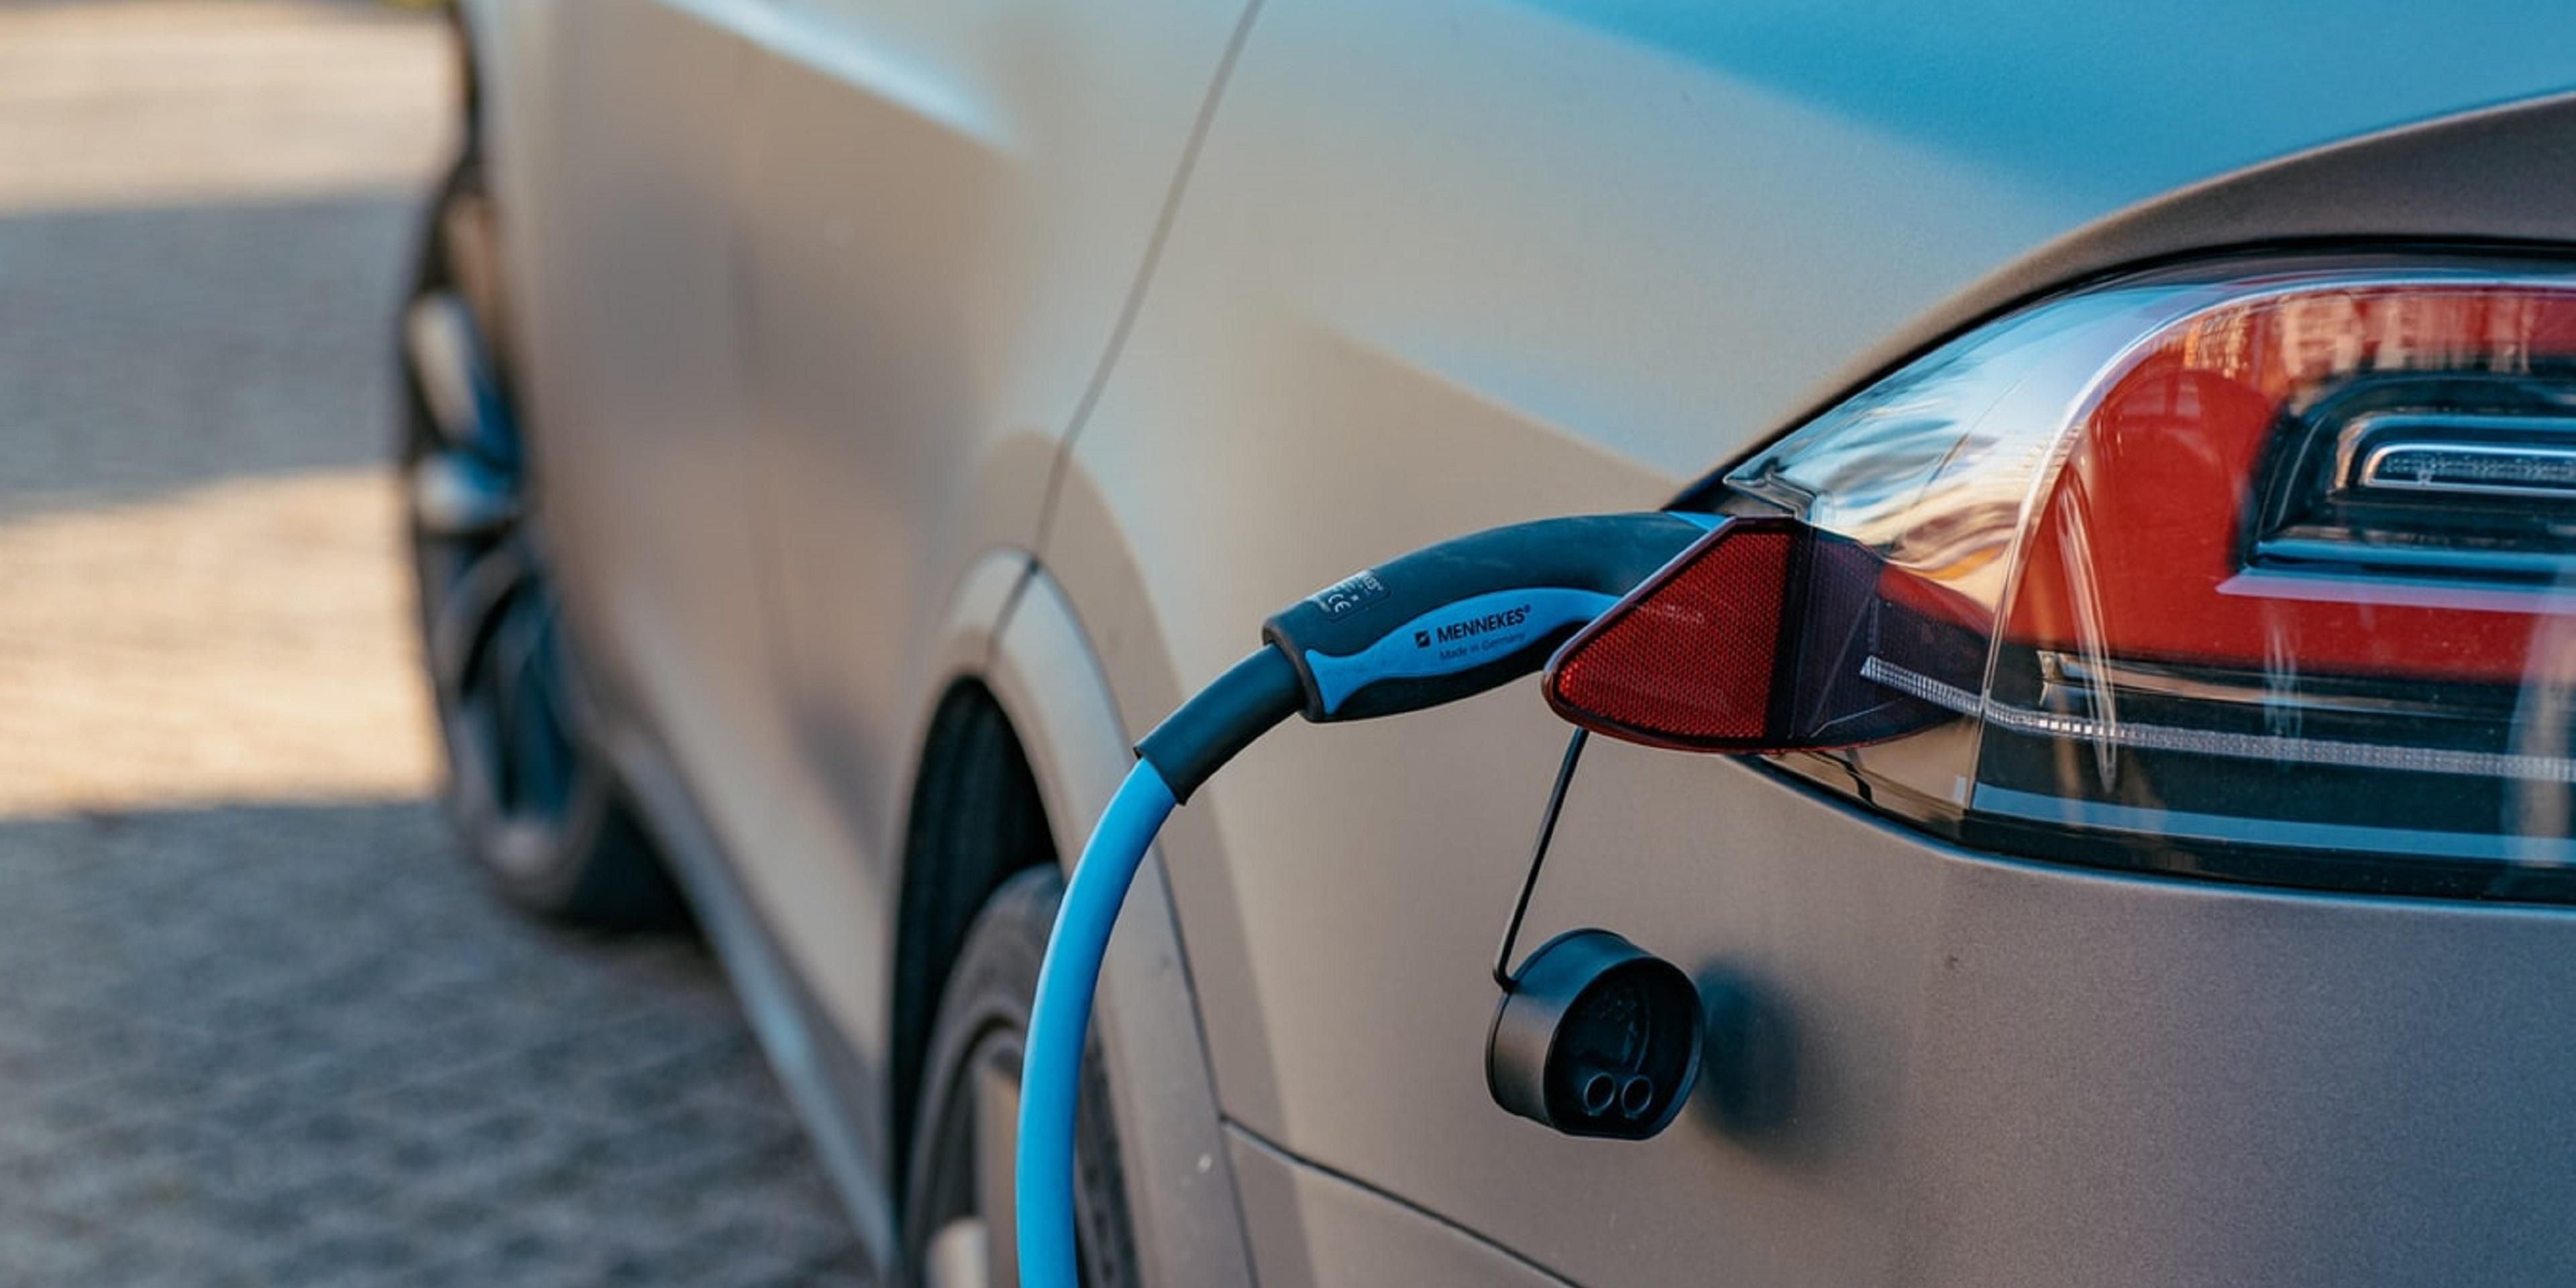 Driving an electric vehicle? Visit one of our complimentary convenient electronic charging stations during your stay. 
